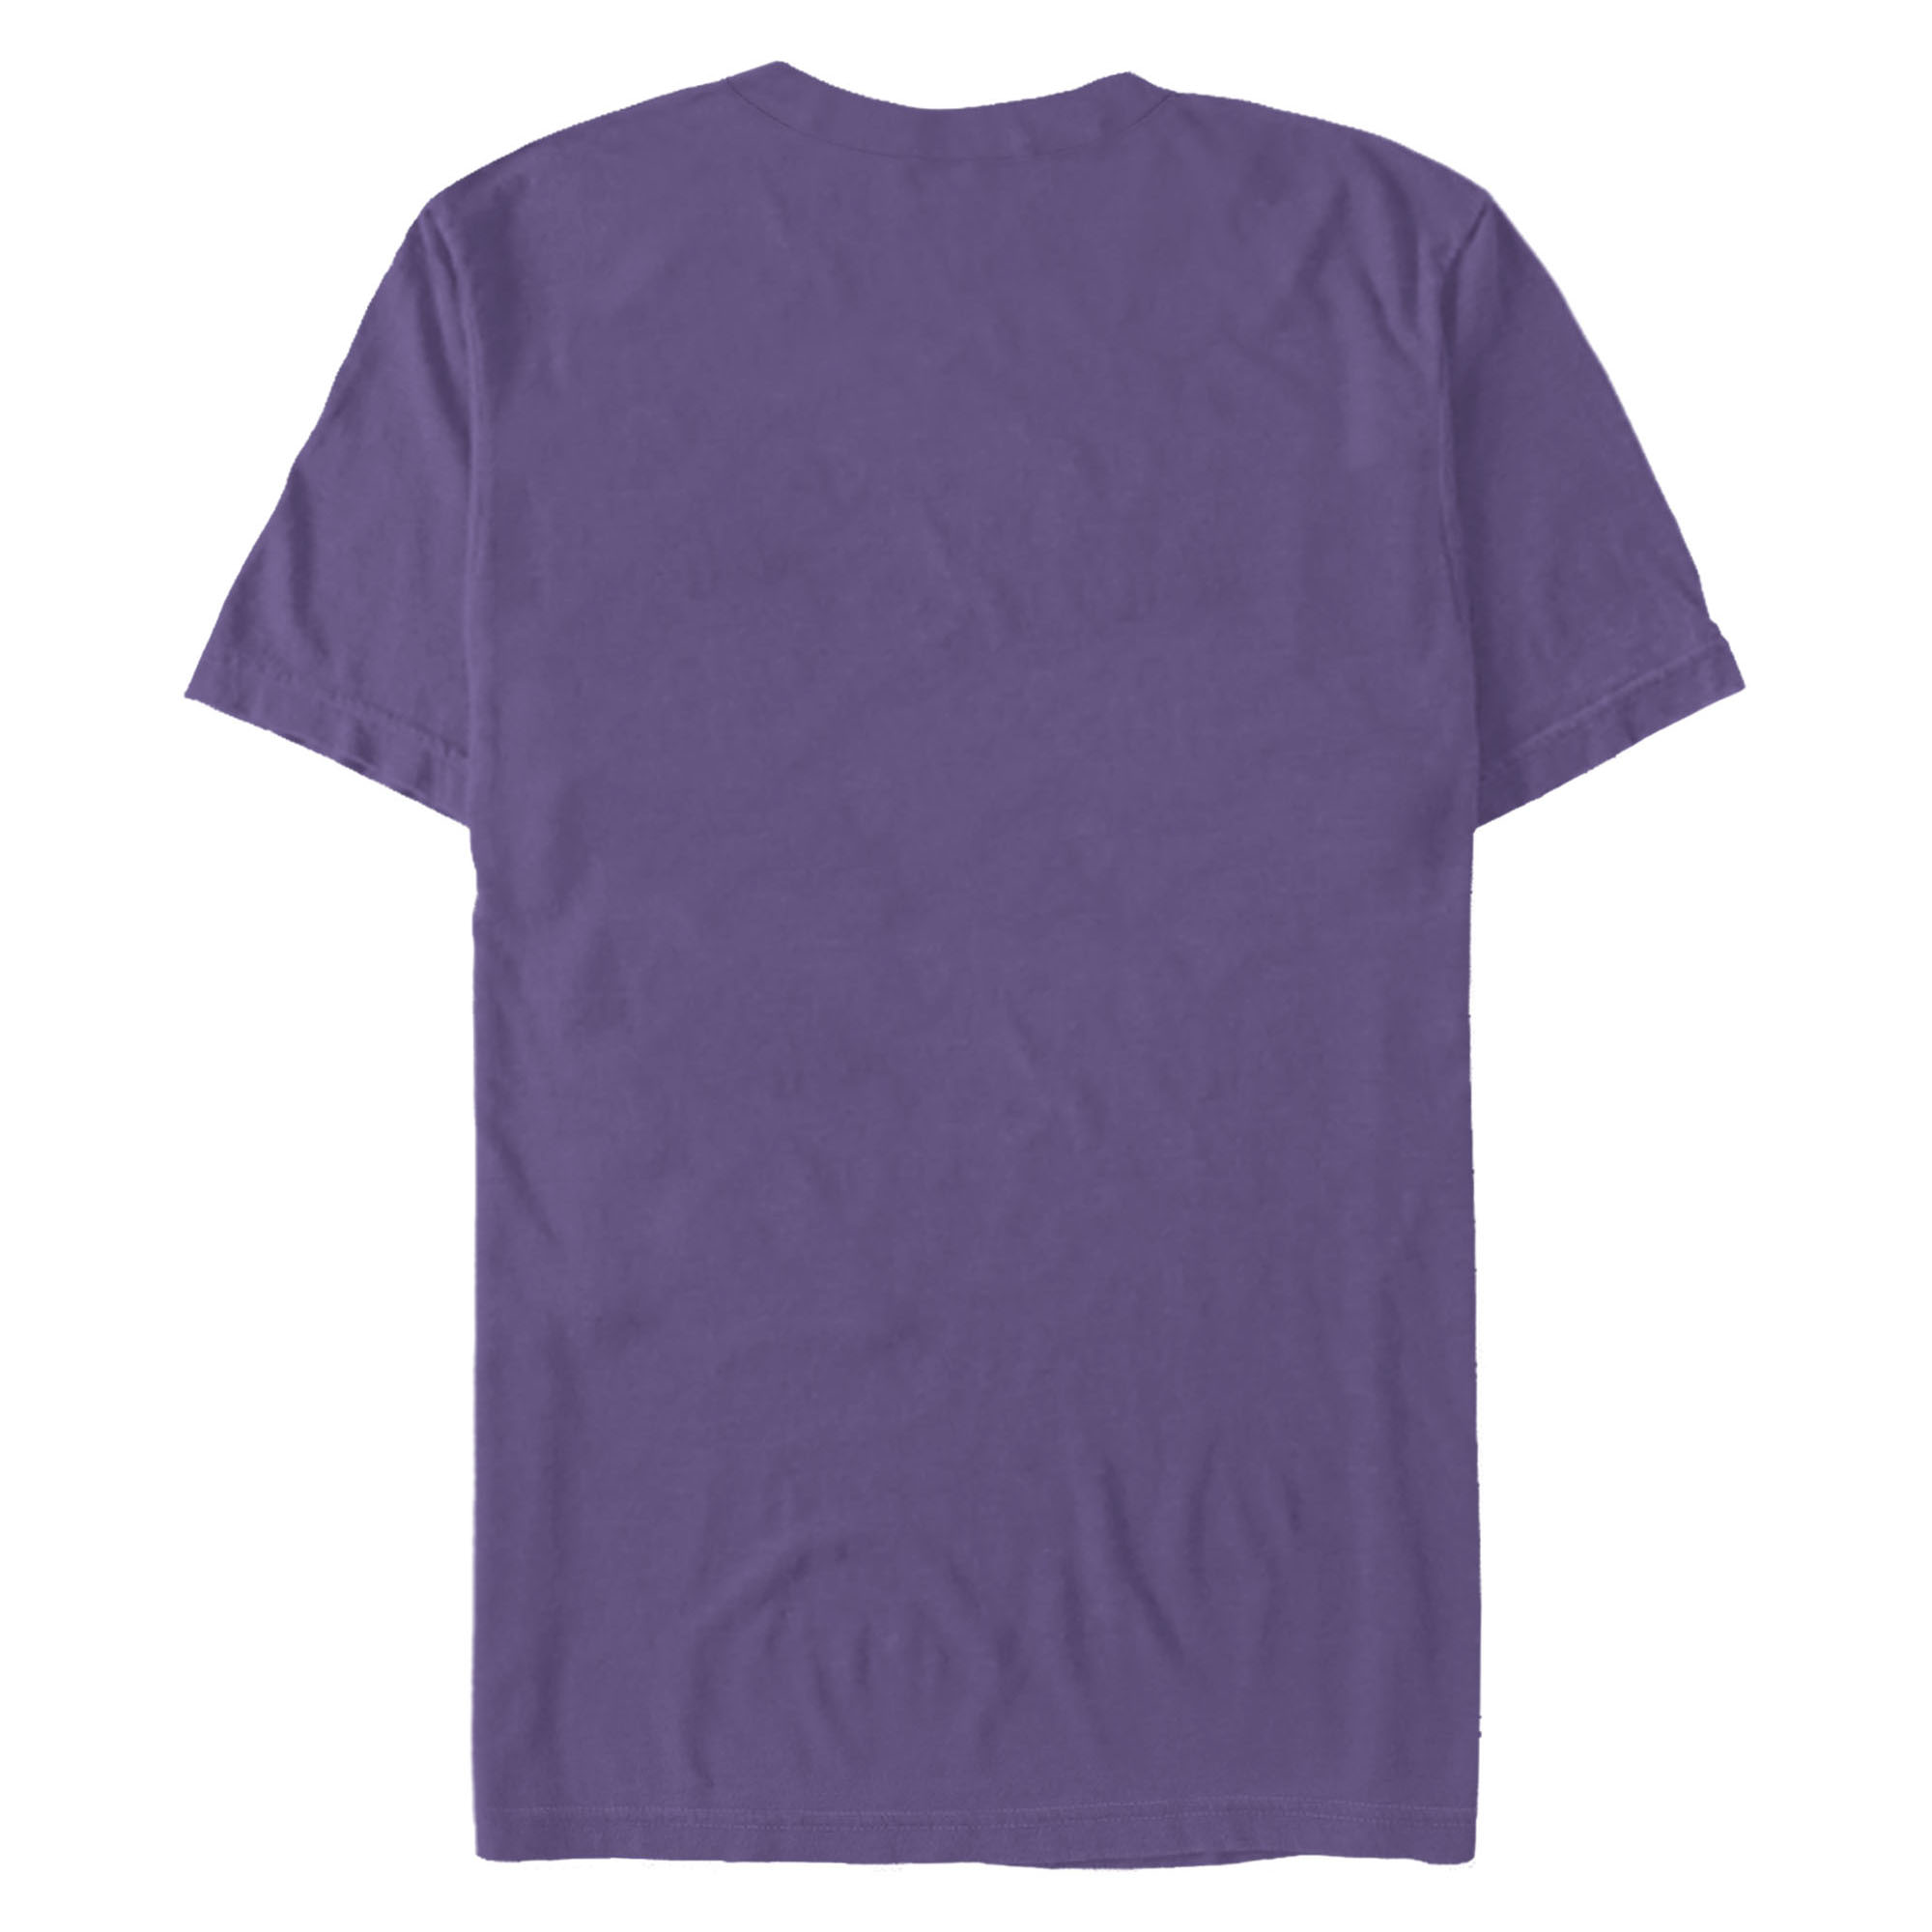 Lord Ganesh Halftone 2 Mens Purple Graphic Tee - Design By Humans  3XL - image 3 of 3